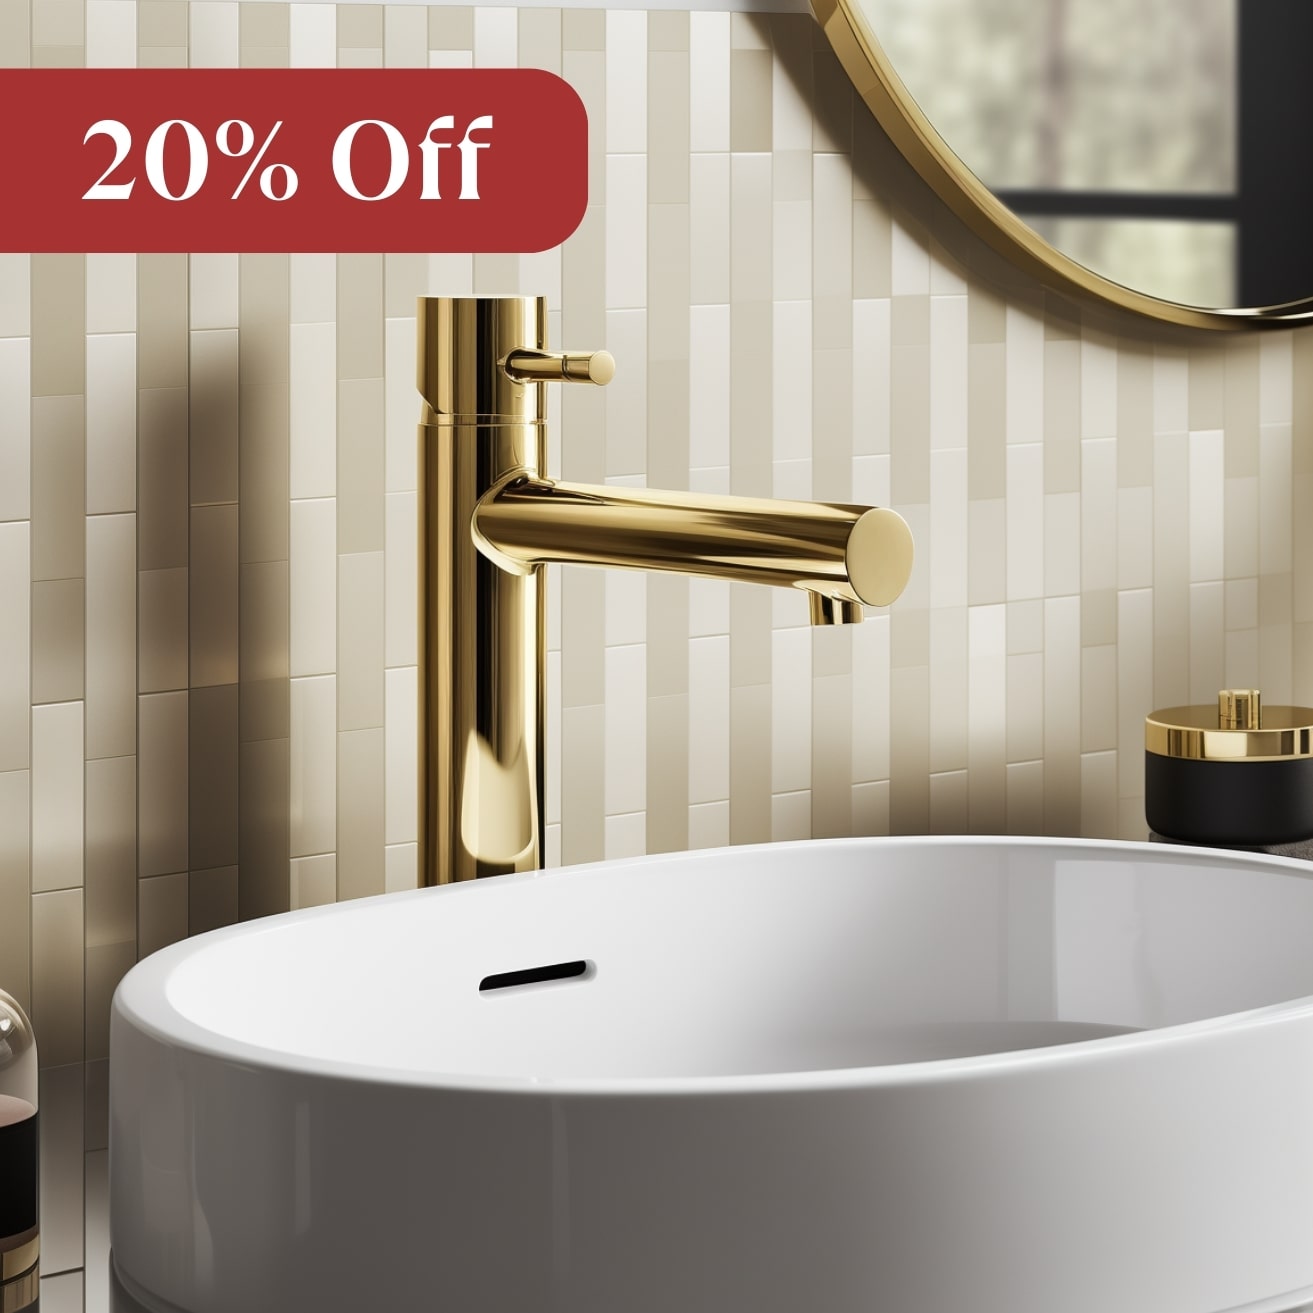 20% Off Faucets